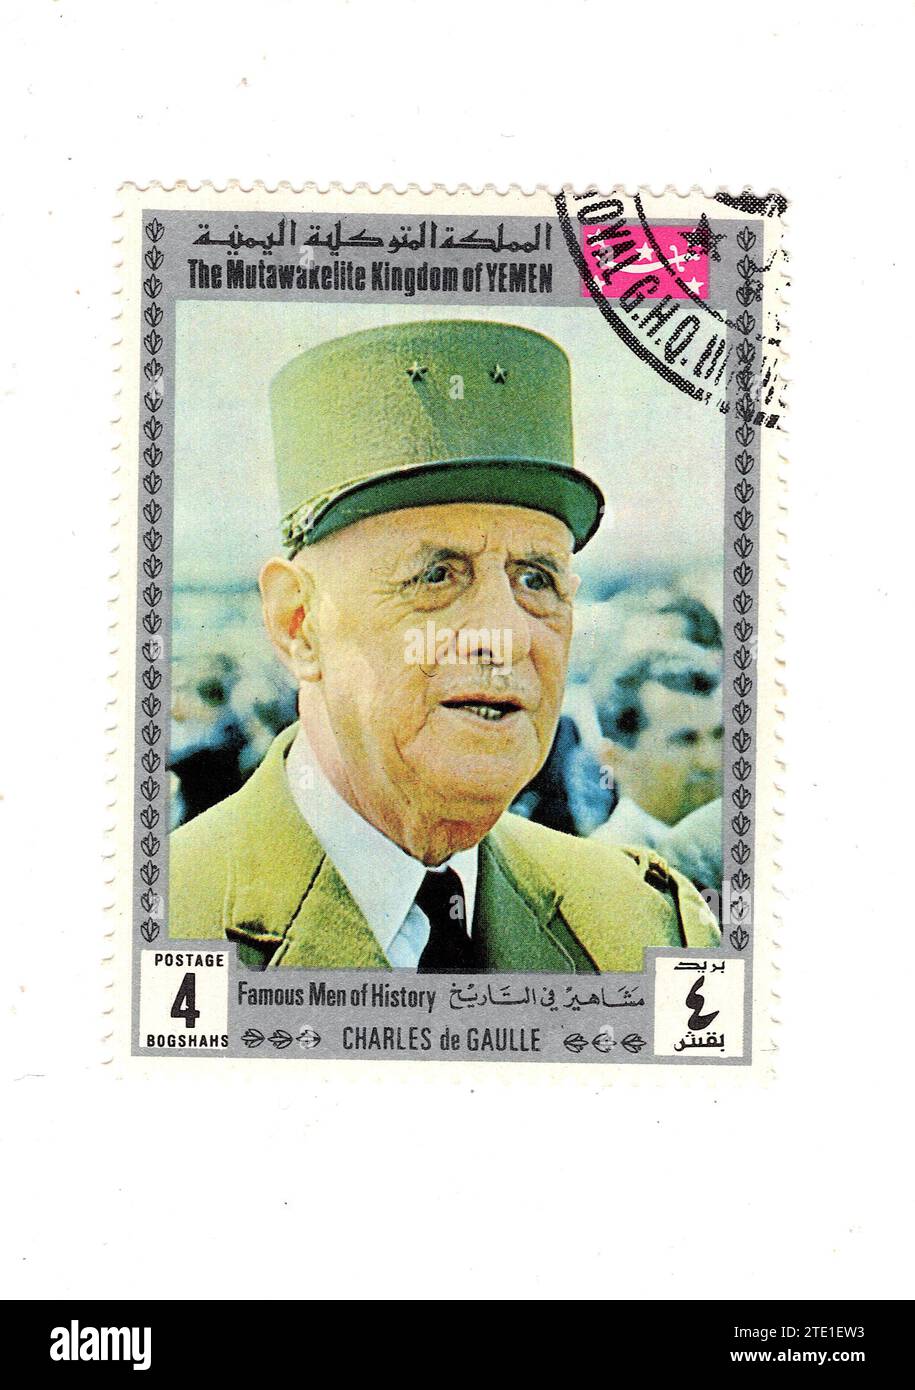 A vintage postage stamp from Yemen featuring a portrait of Charles de Gaulle isolated on a white background. Stock Photo